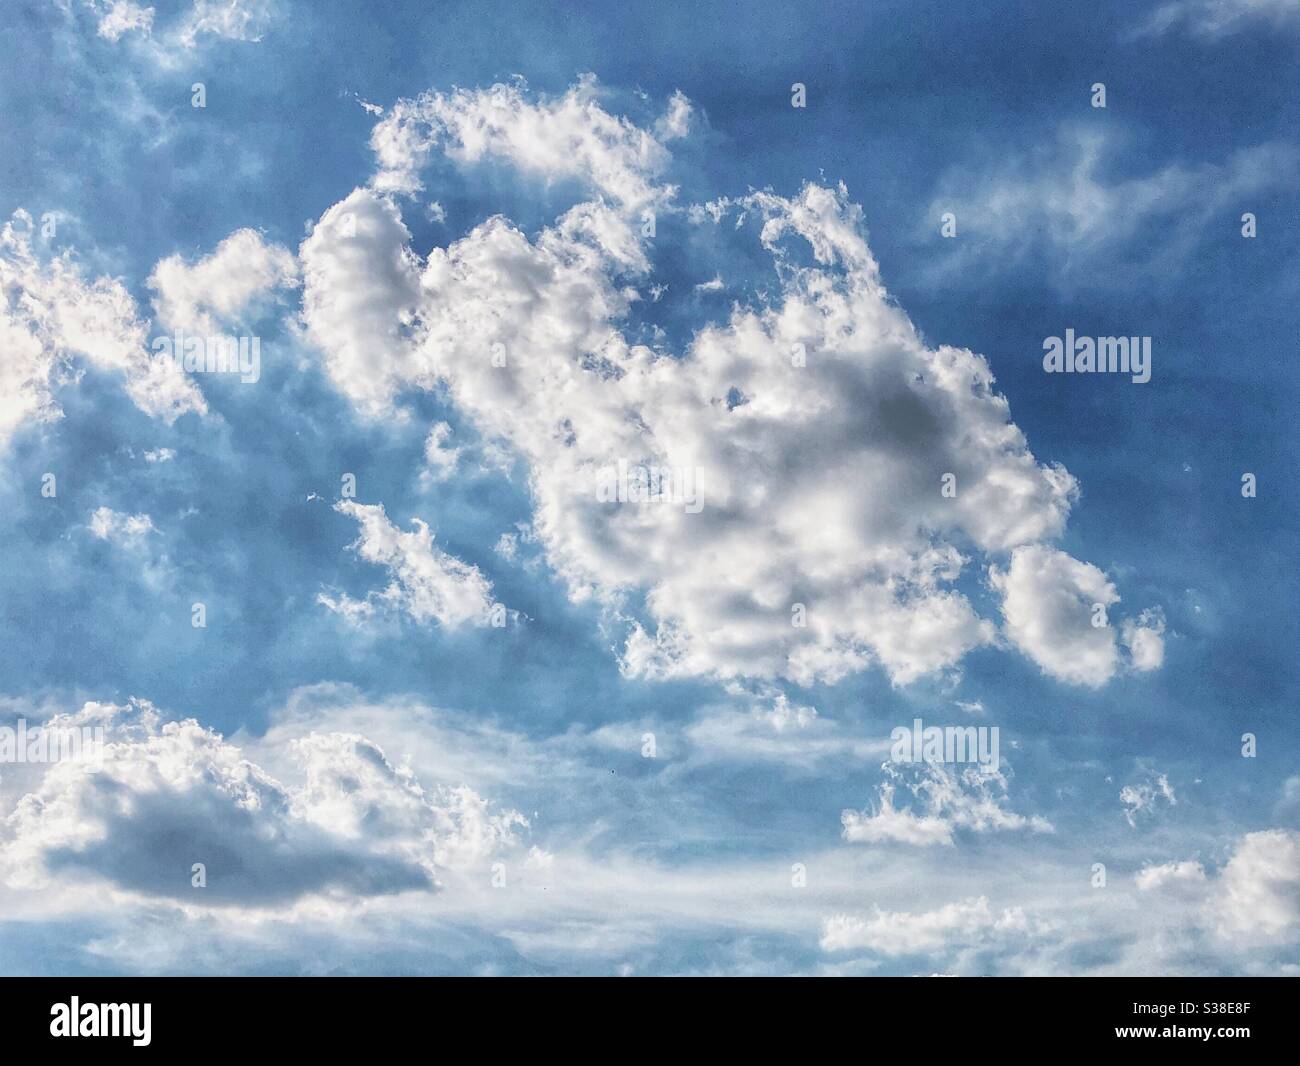 Sky gazing, cloud formations. Stock Photo